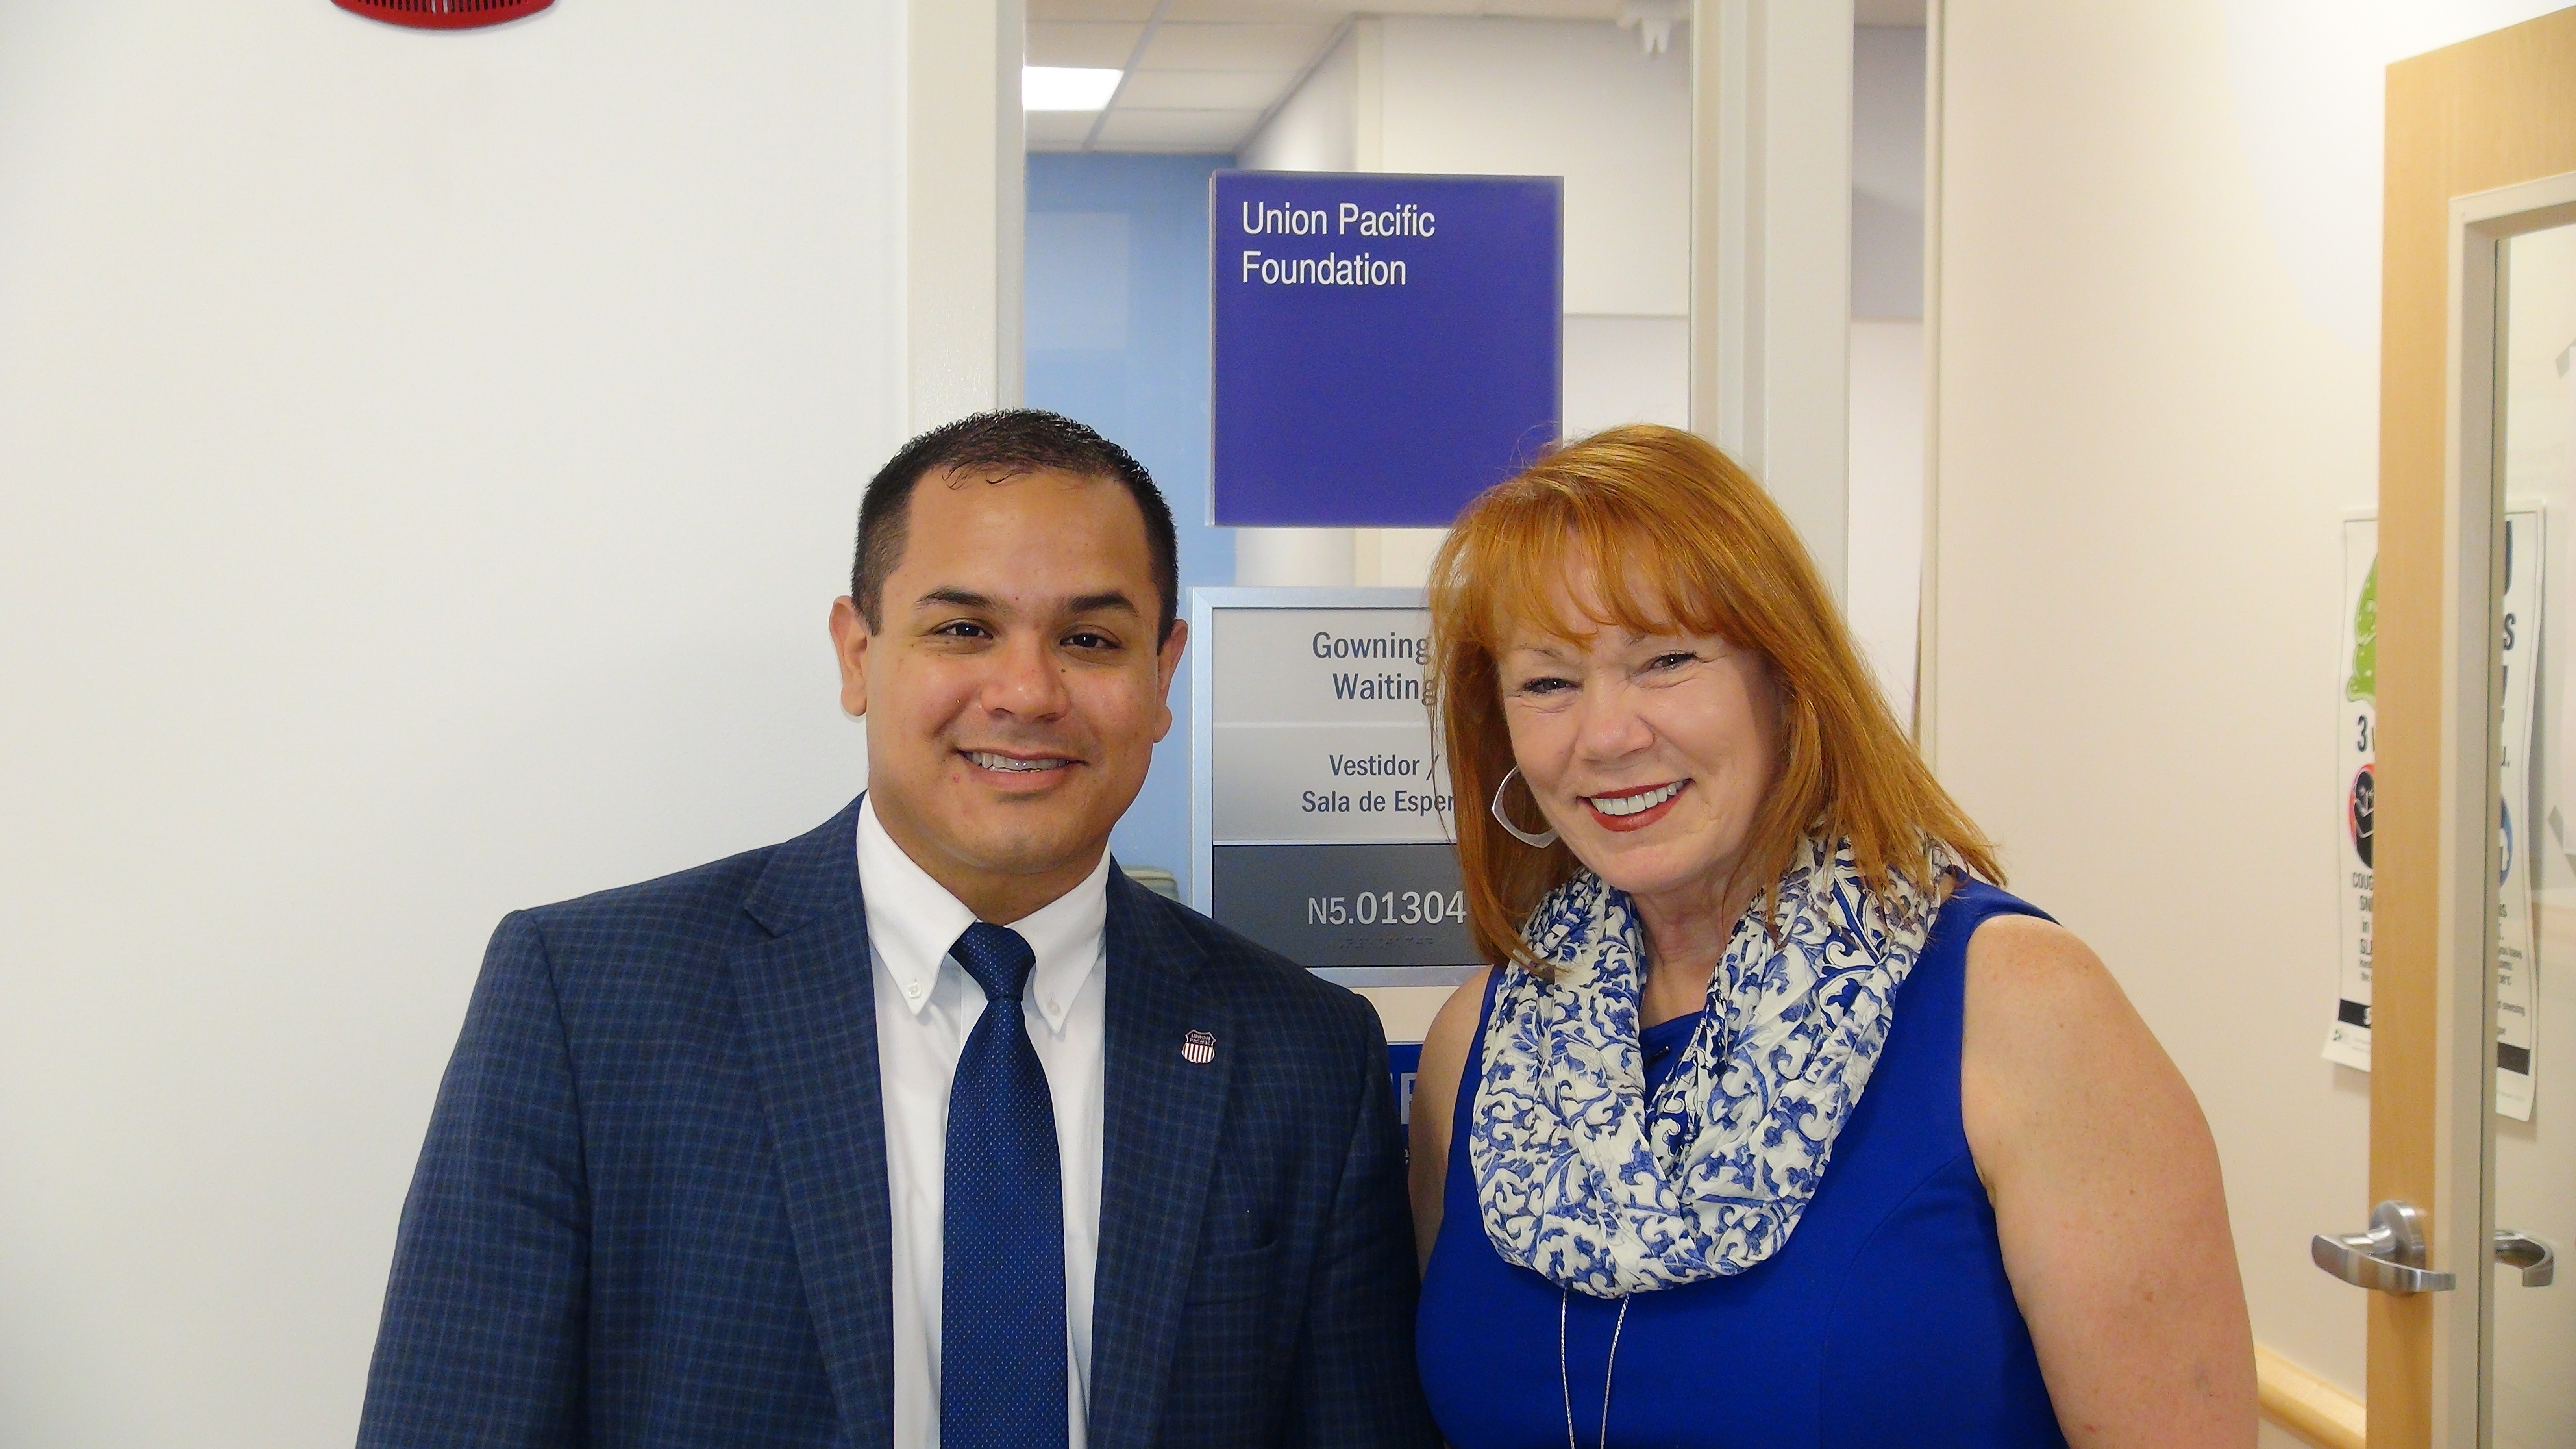 Dennece Knight, Executive Director of EPCH Foundation and Ivan Jaime, Director of Public Affairs of Union Pacific